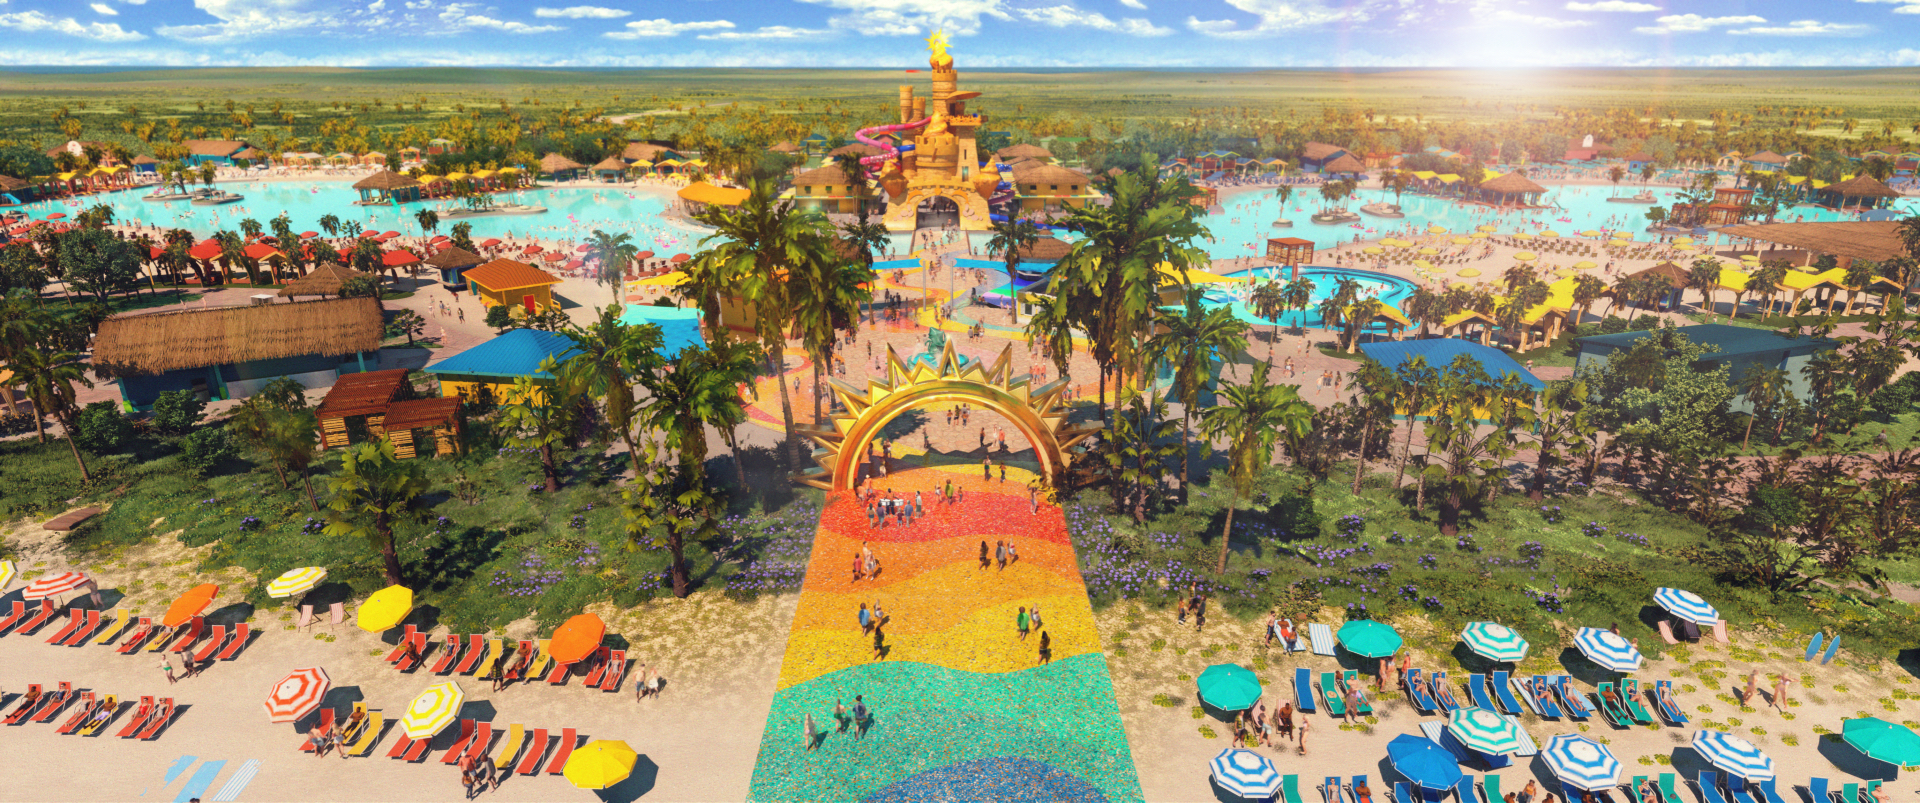 Carnival Cruise Line Kicks Off Celebration Key Portal Reveals with Preview of Paradise Plaza and Calypso Lagoon